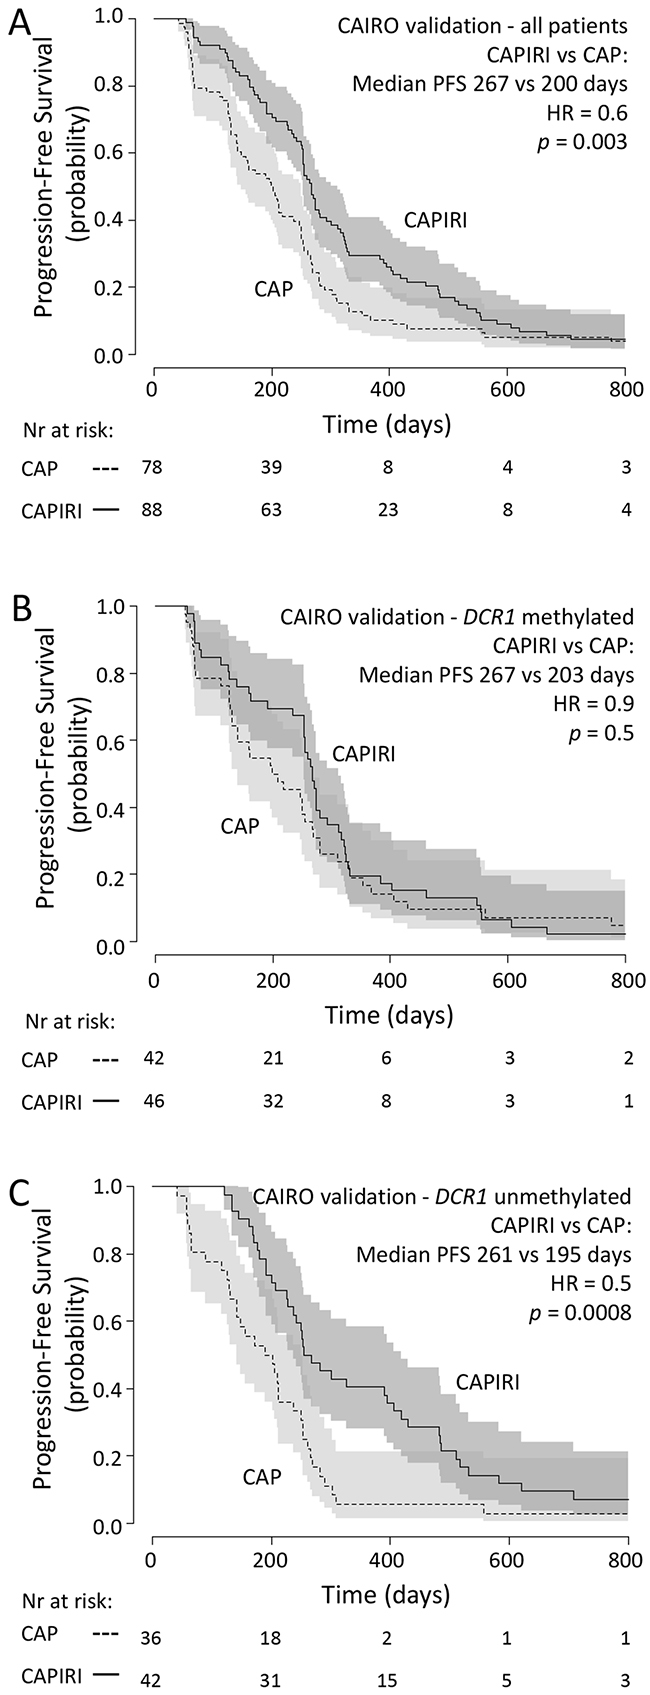 CAIRO validation set: Progression-free survival Progression free survival in metastatic CRC cancer patients treated in first-line with CAP (dashed line) or CAPIRI (solid line)in (A) all patients from the CAIRO validation set, in (B) patientswith methylated tumor DCR1or in (C) patients with unmethylated tumor DCR1.